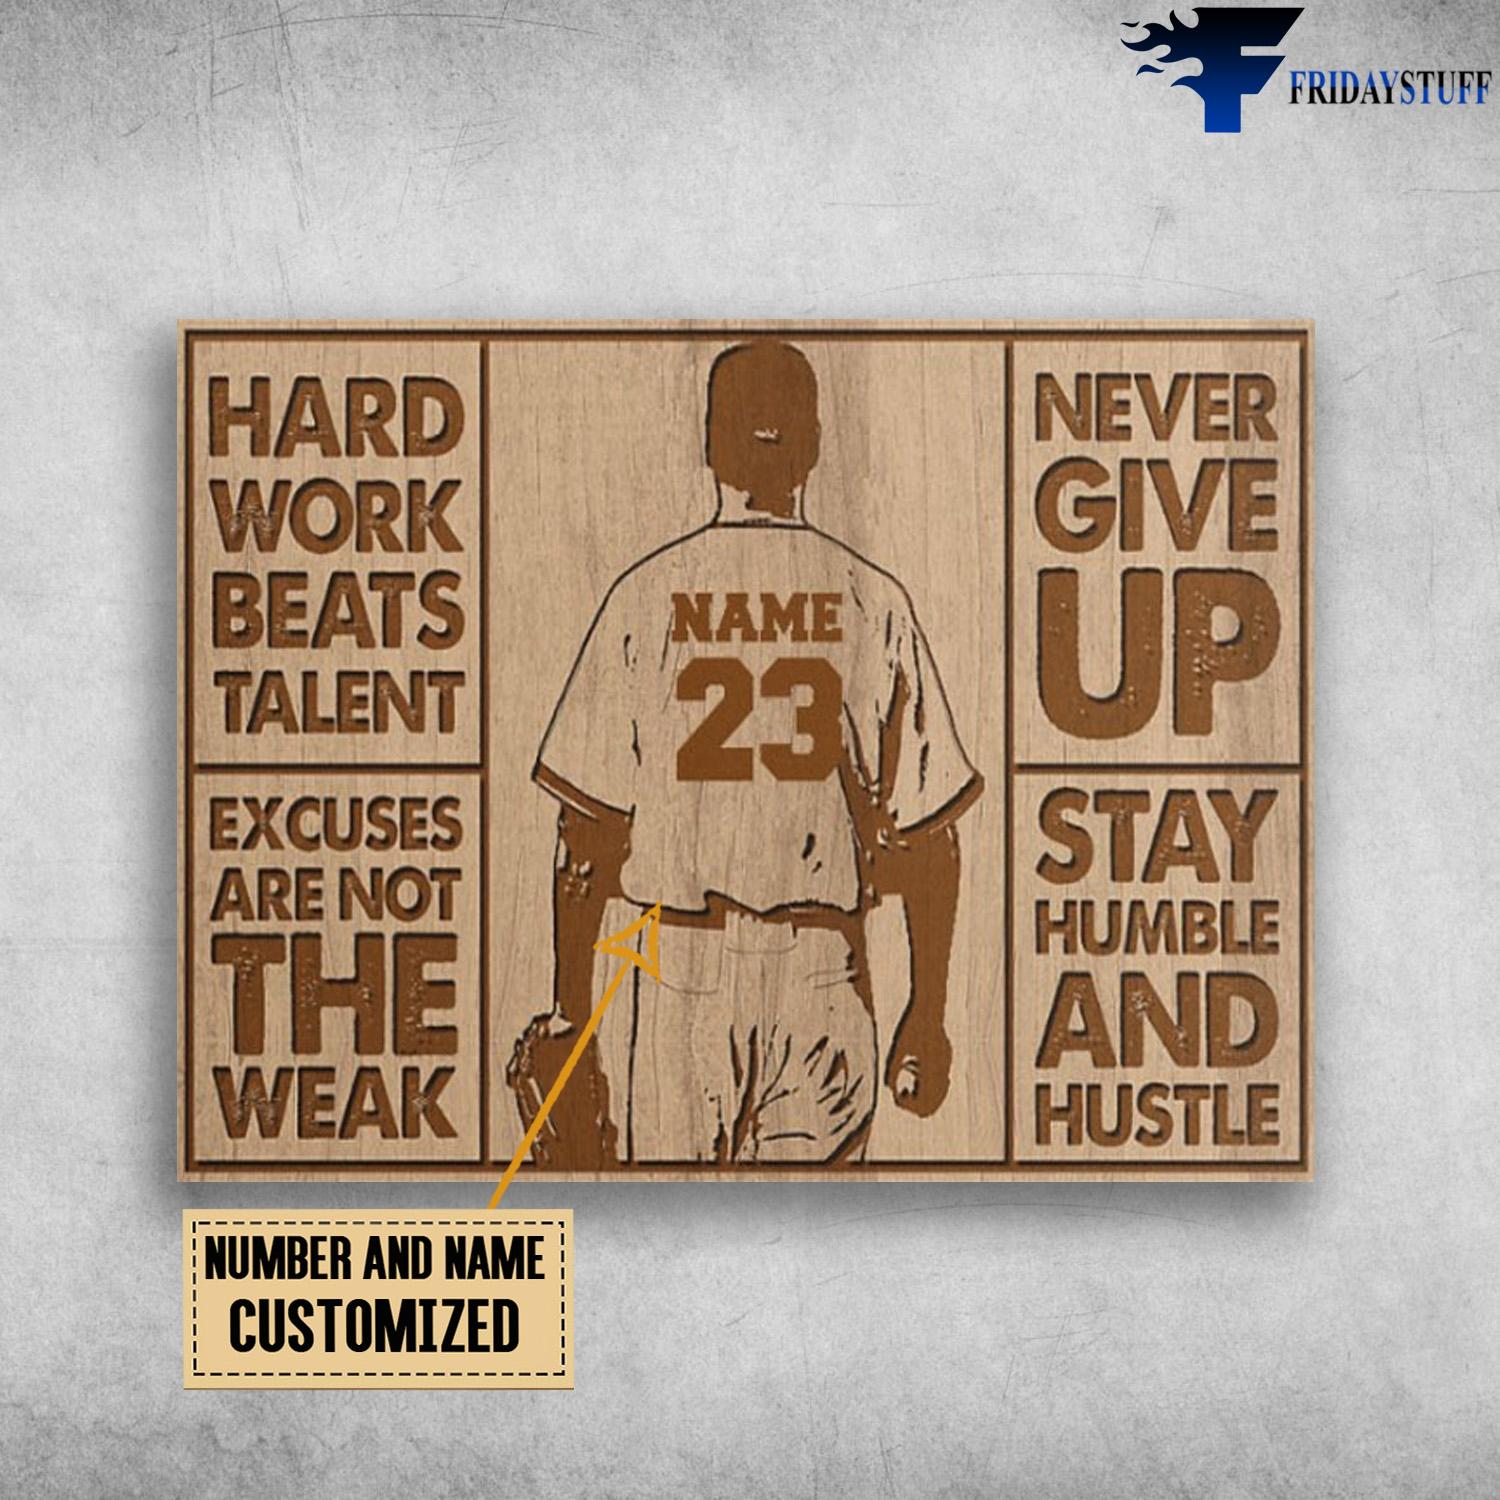 Baseball Player, Baseball Lover, Hard Work Beats Talent, Excuses Are Not The Weak, Never Give Up, Stay Humble And Hustle